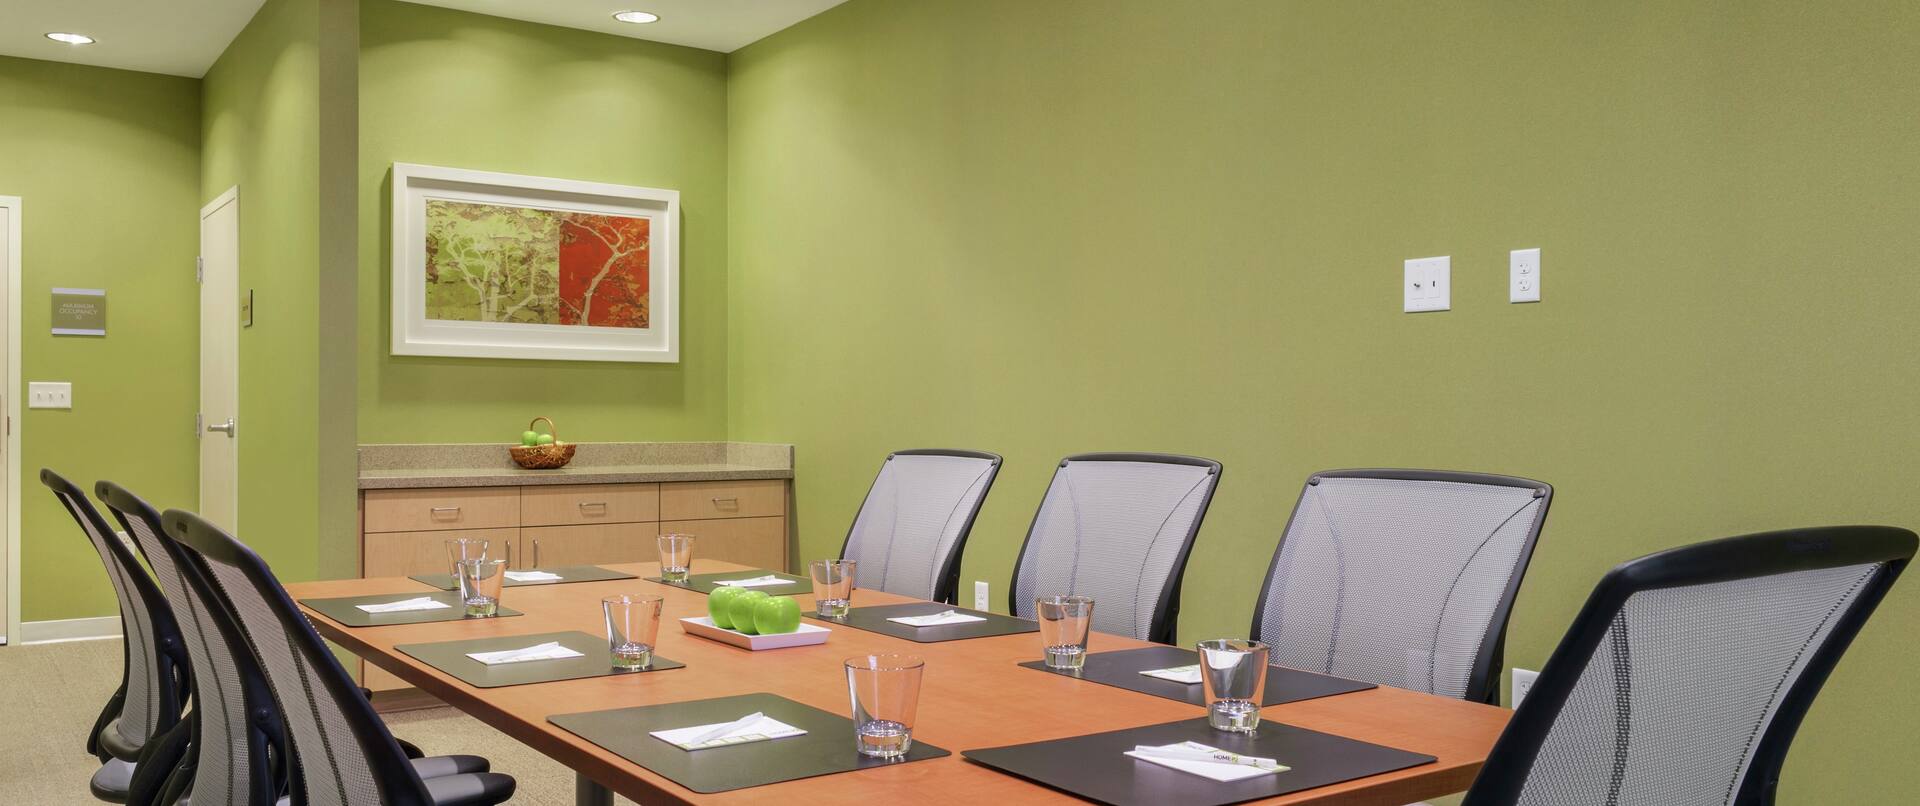 Conference Table and Chairs in Meeting Room